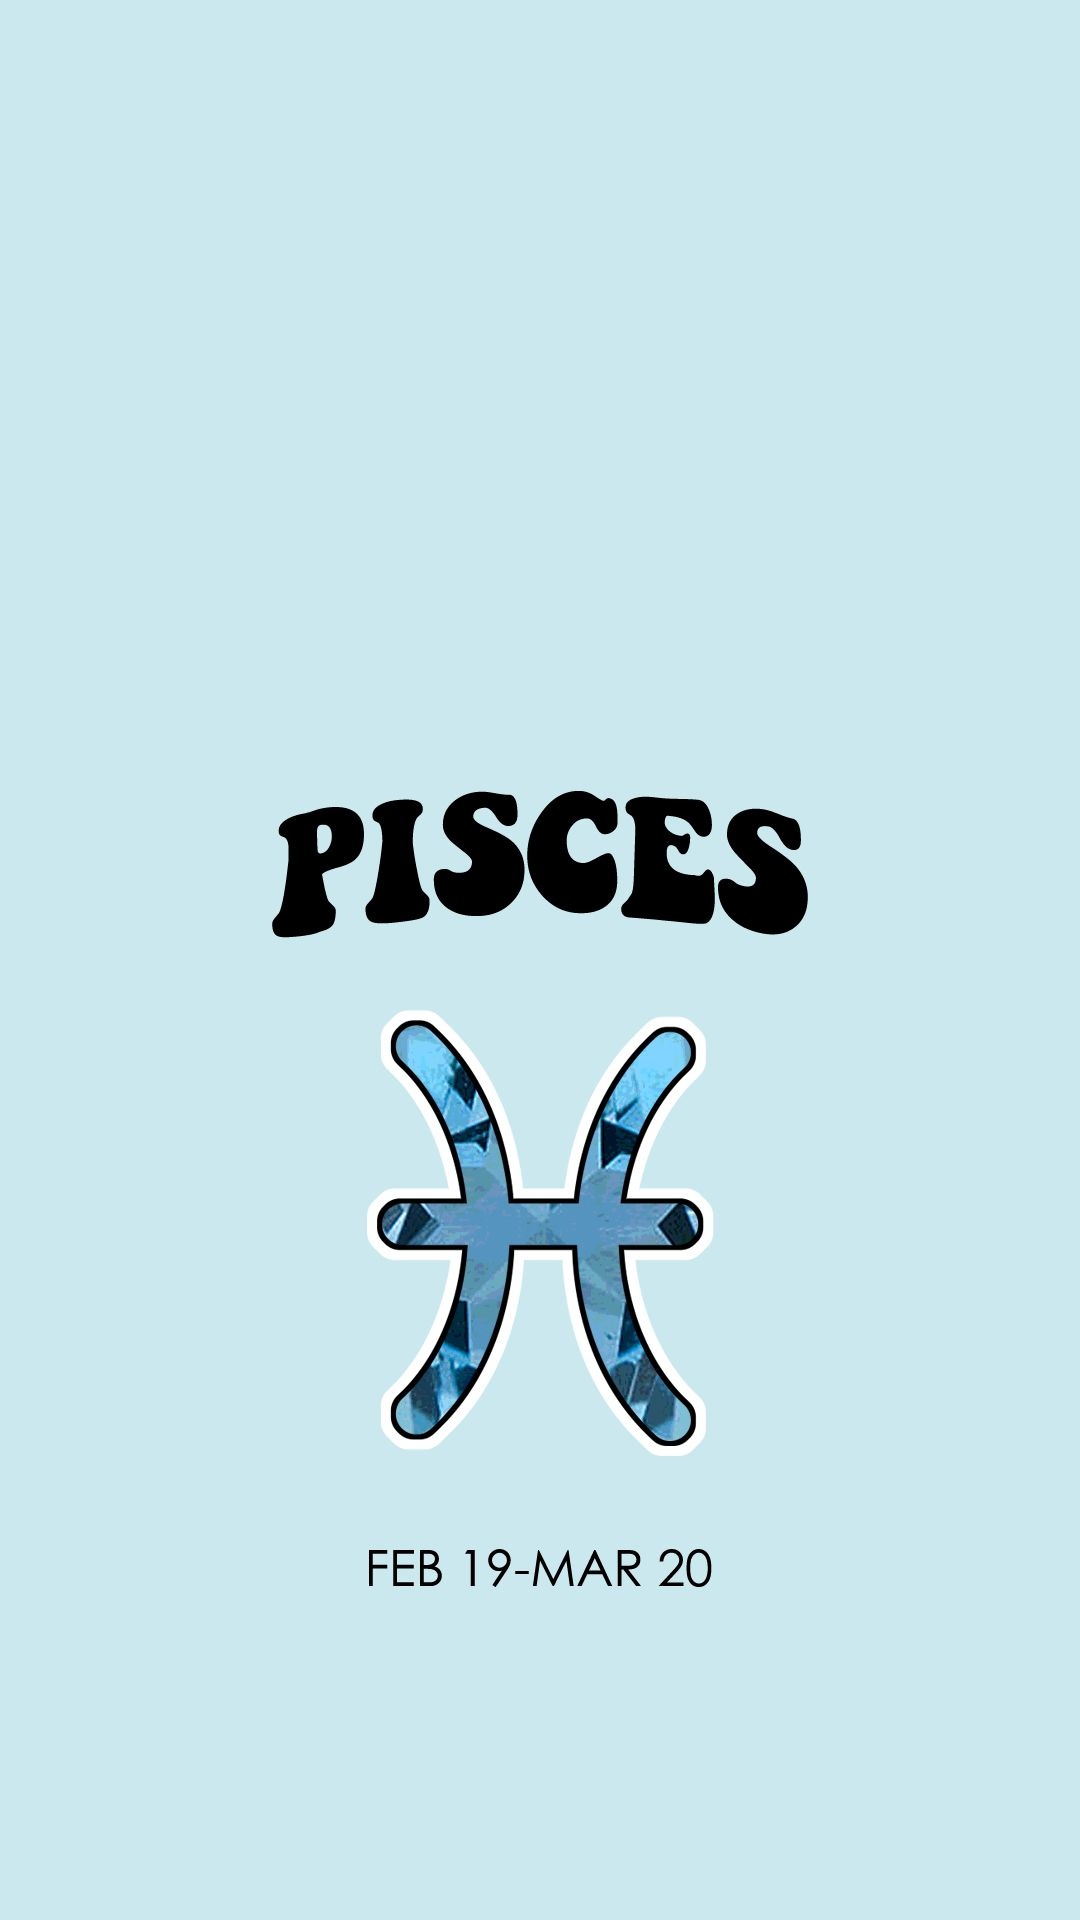 Pisces Zodiac Sign, Free wallpapers, Zodiac sign backgrounds, Personal expression, 1080x1920 Full HD Phone